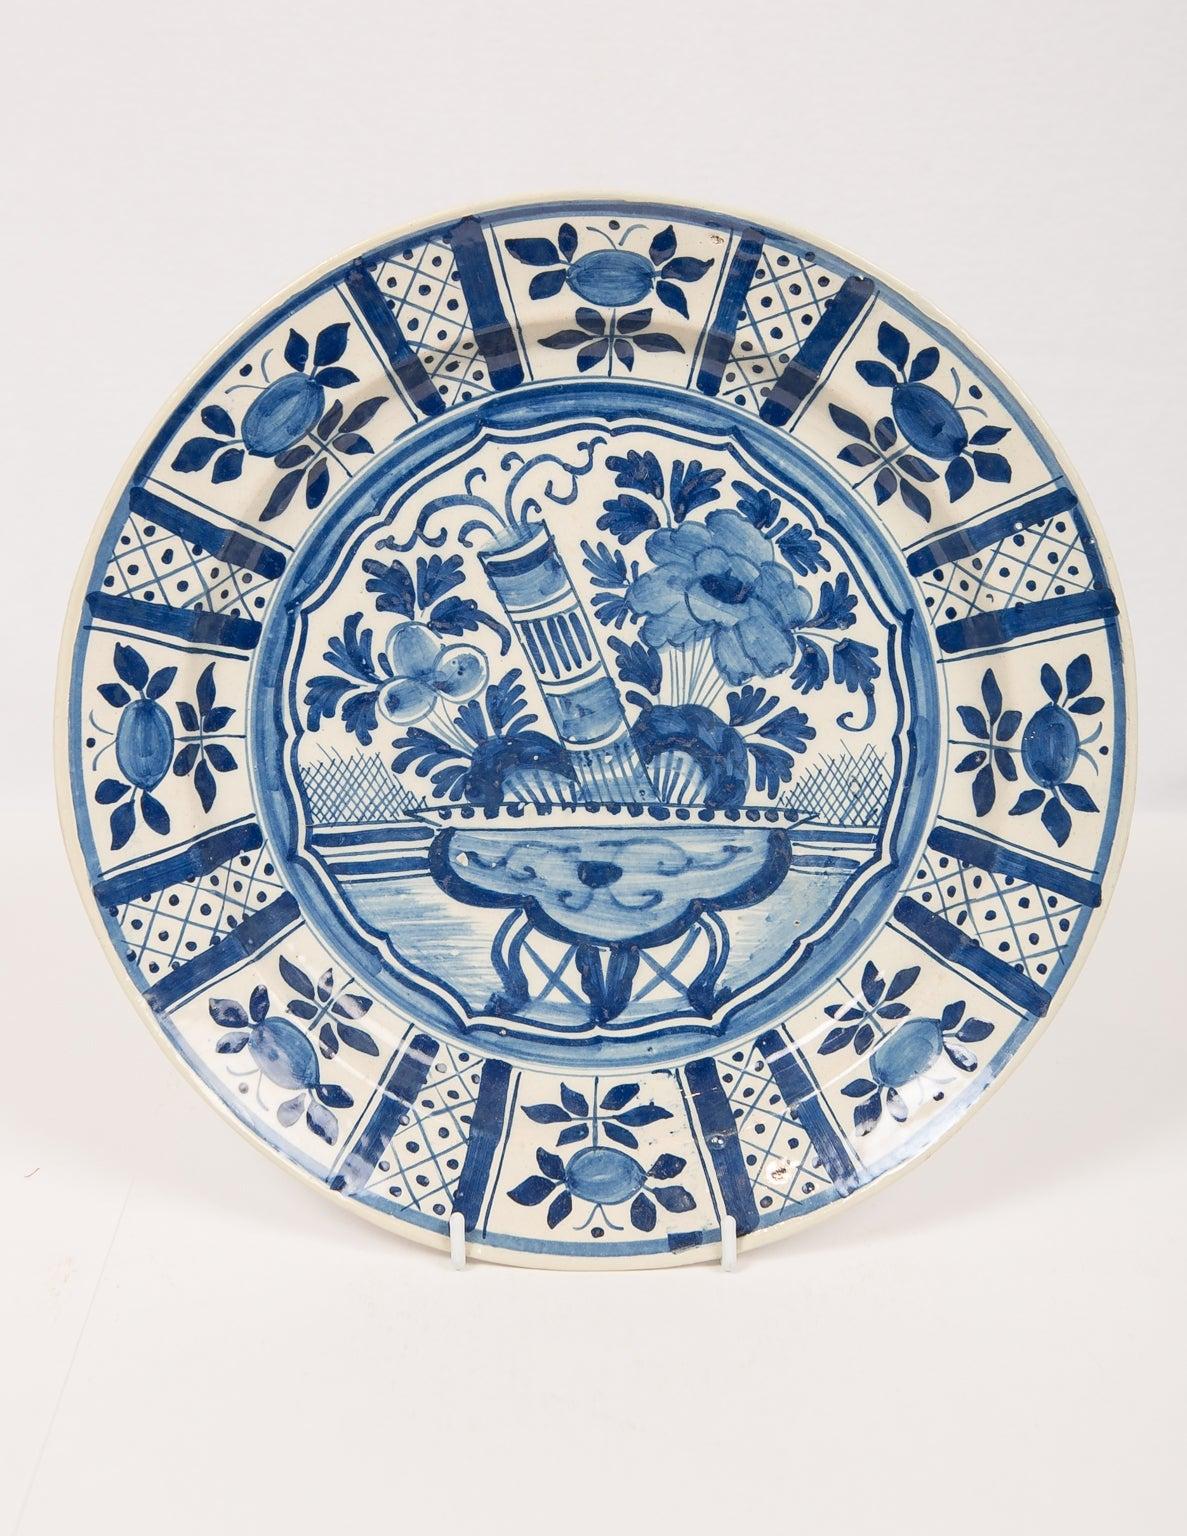 Hand-Painted Eleven Antique Large Delft Blue and White Chargers, Late 18th Century